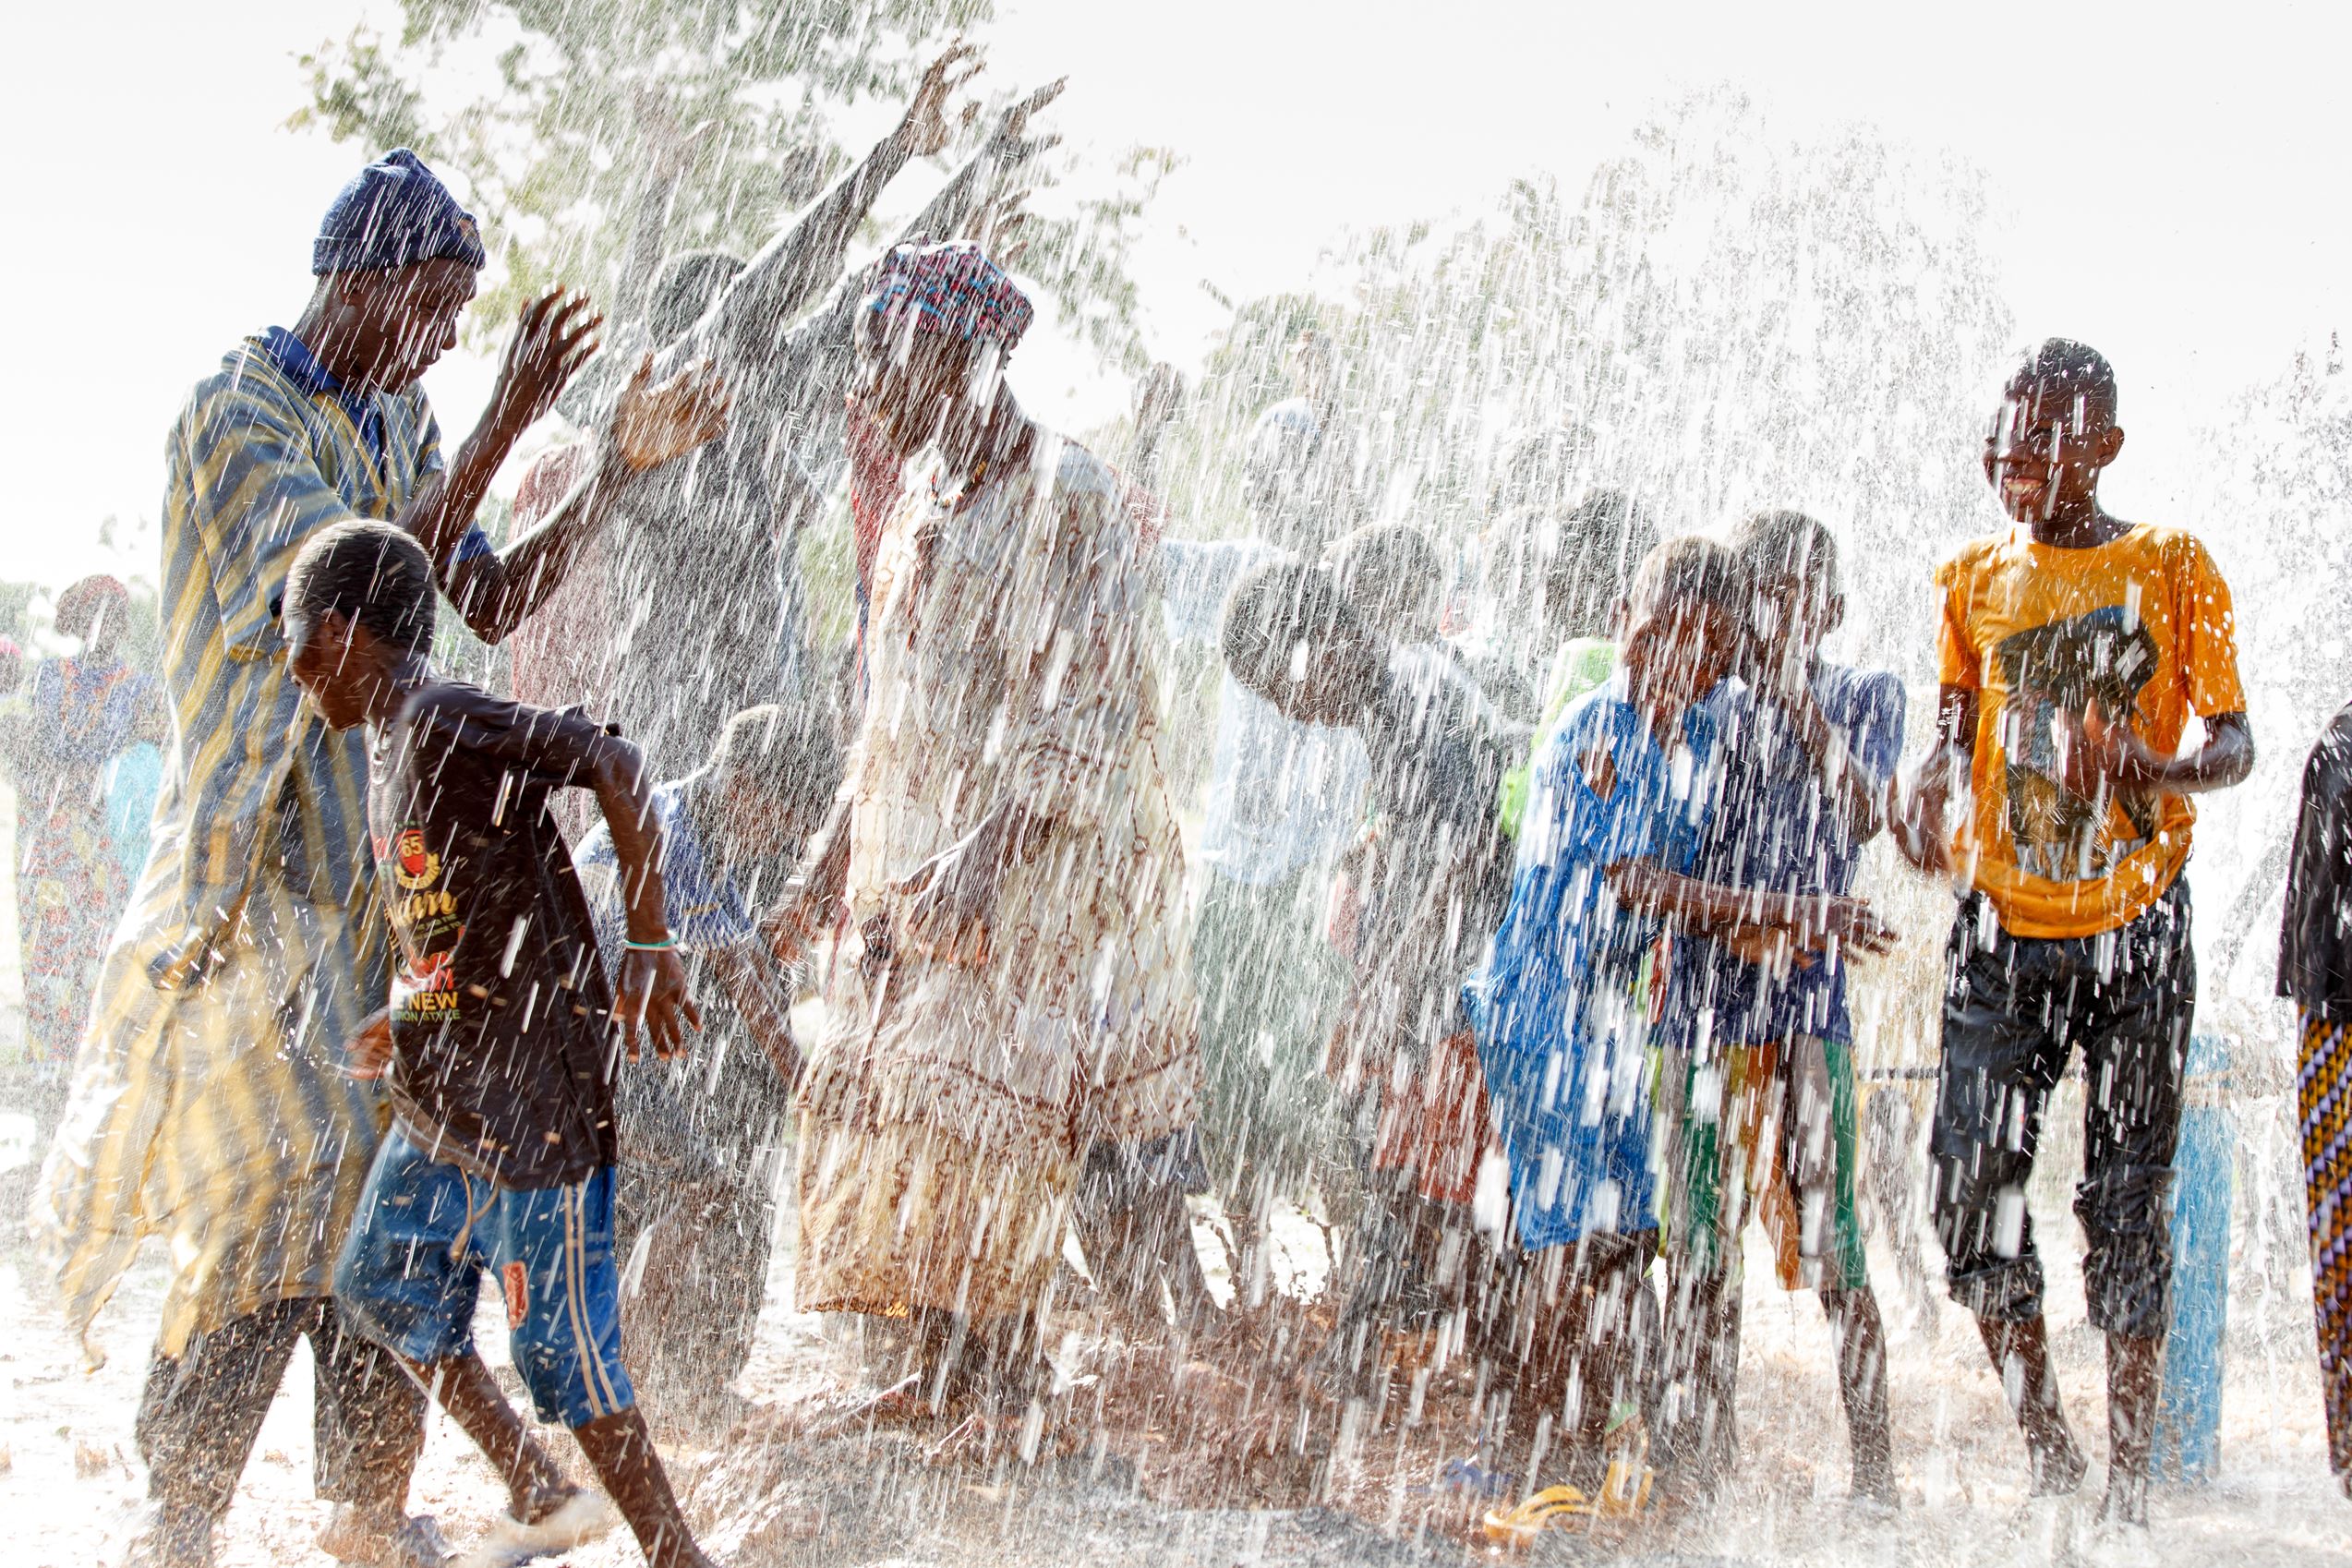 A community in Mali dancing in the flowing water to celebrate World Vision’s 150,000th borehole in the country